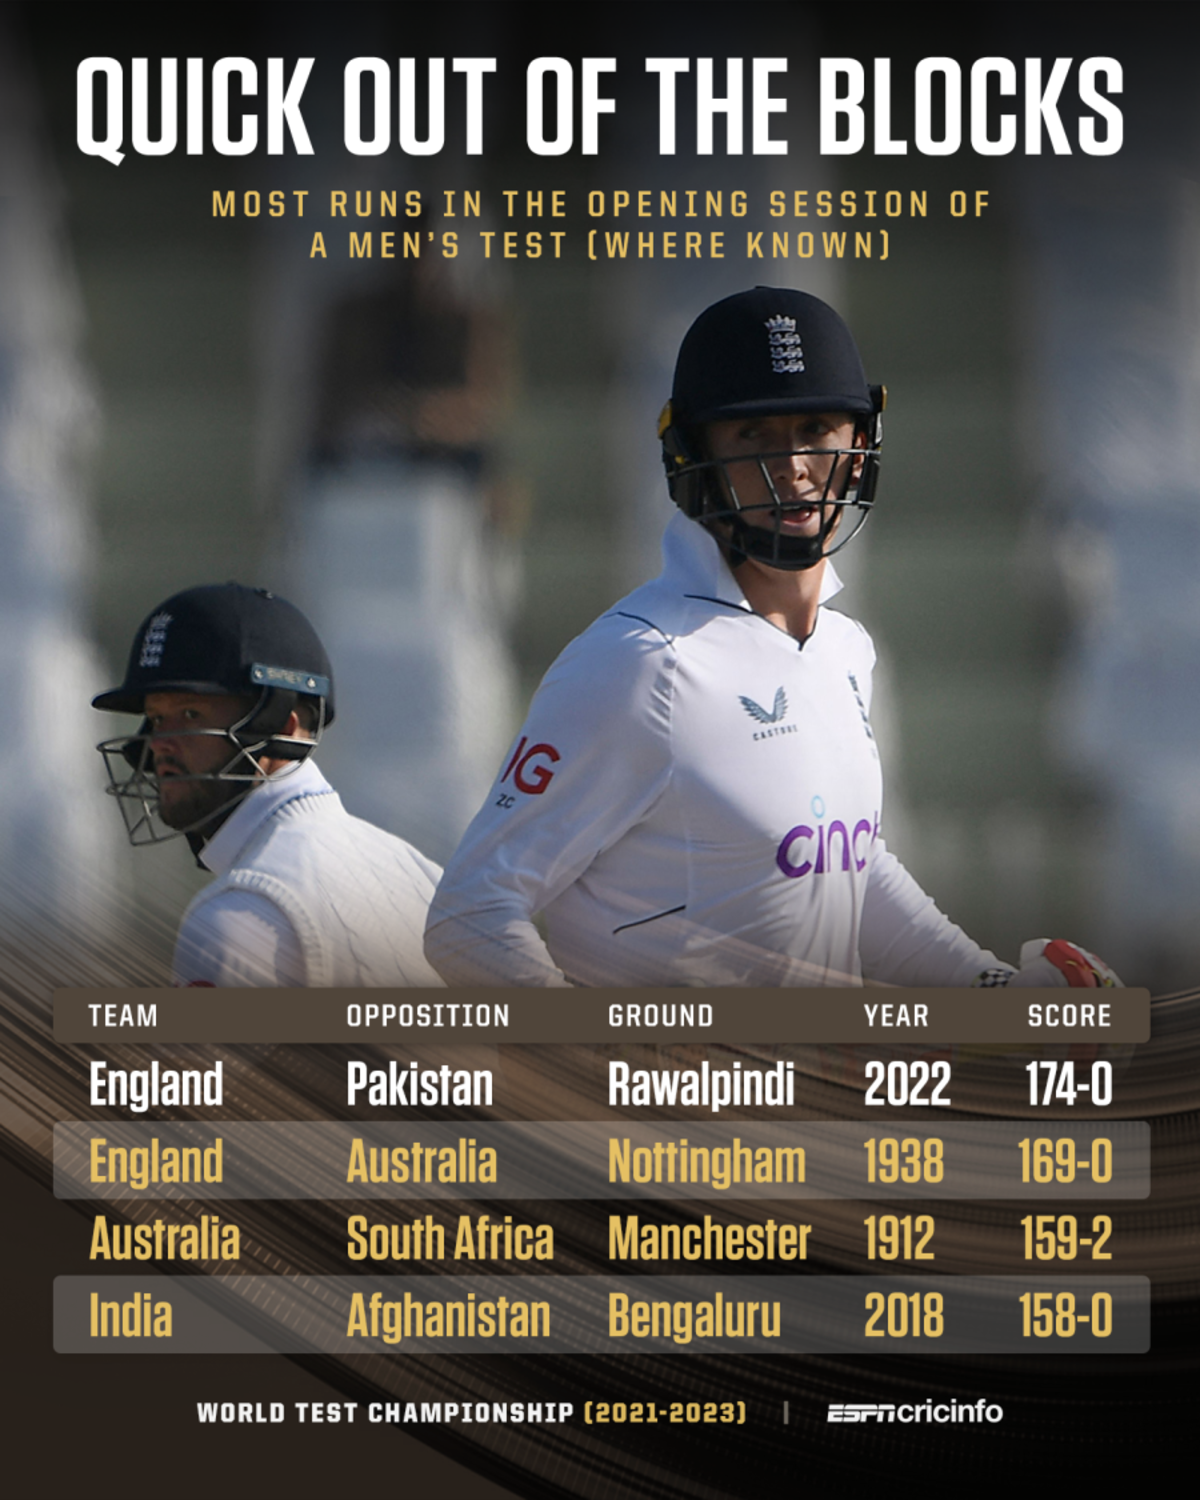 Most runs in opening session of a match